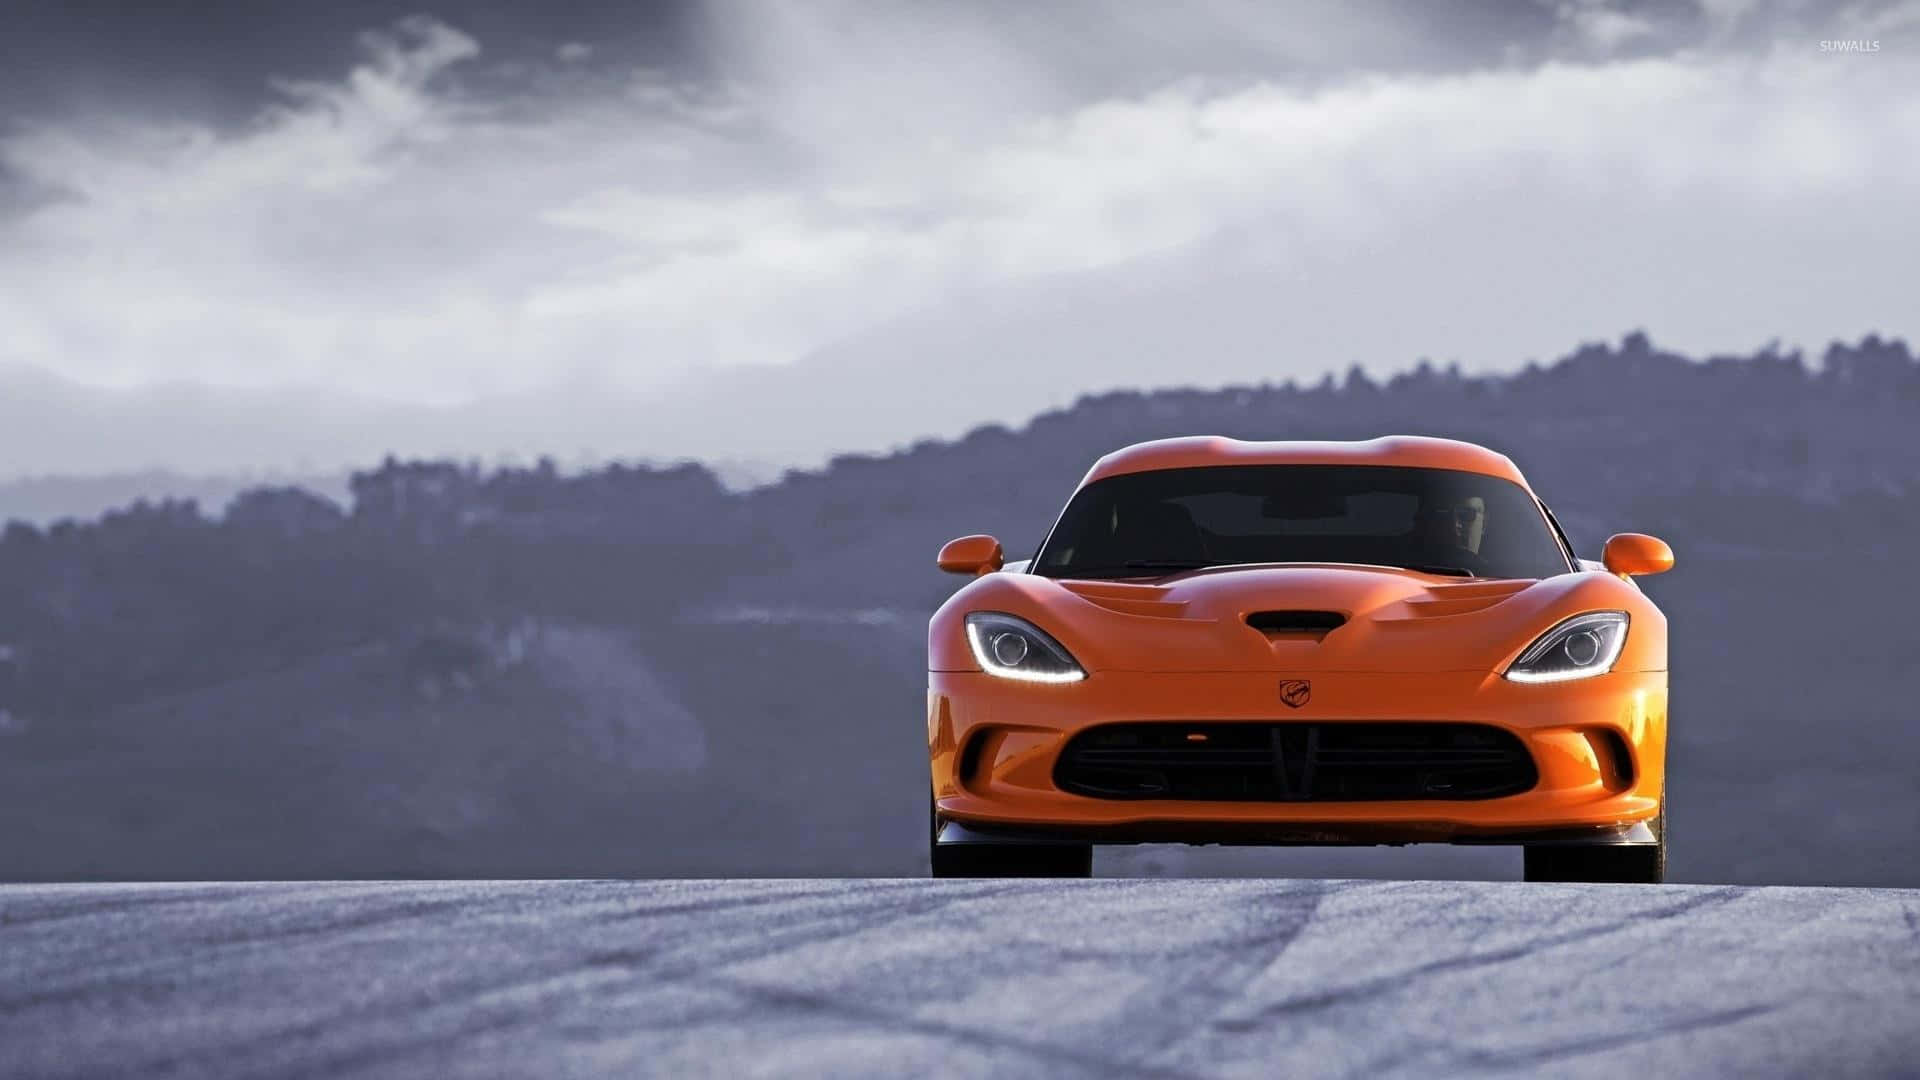 The Both Powerful and Stylish Dodge Viper Wallpaper